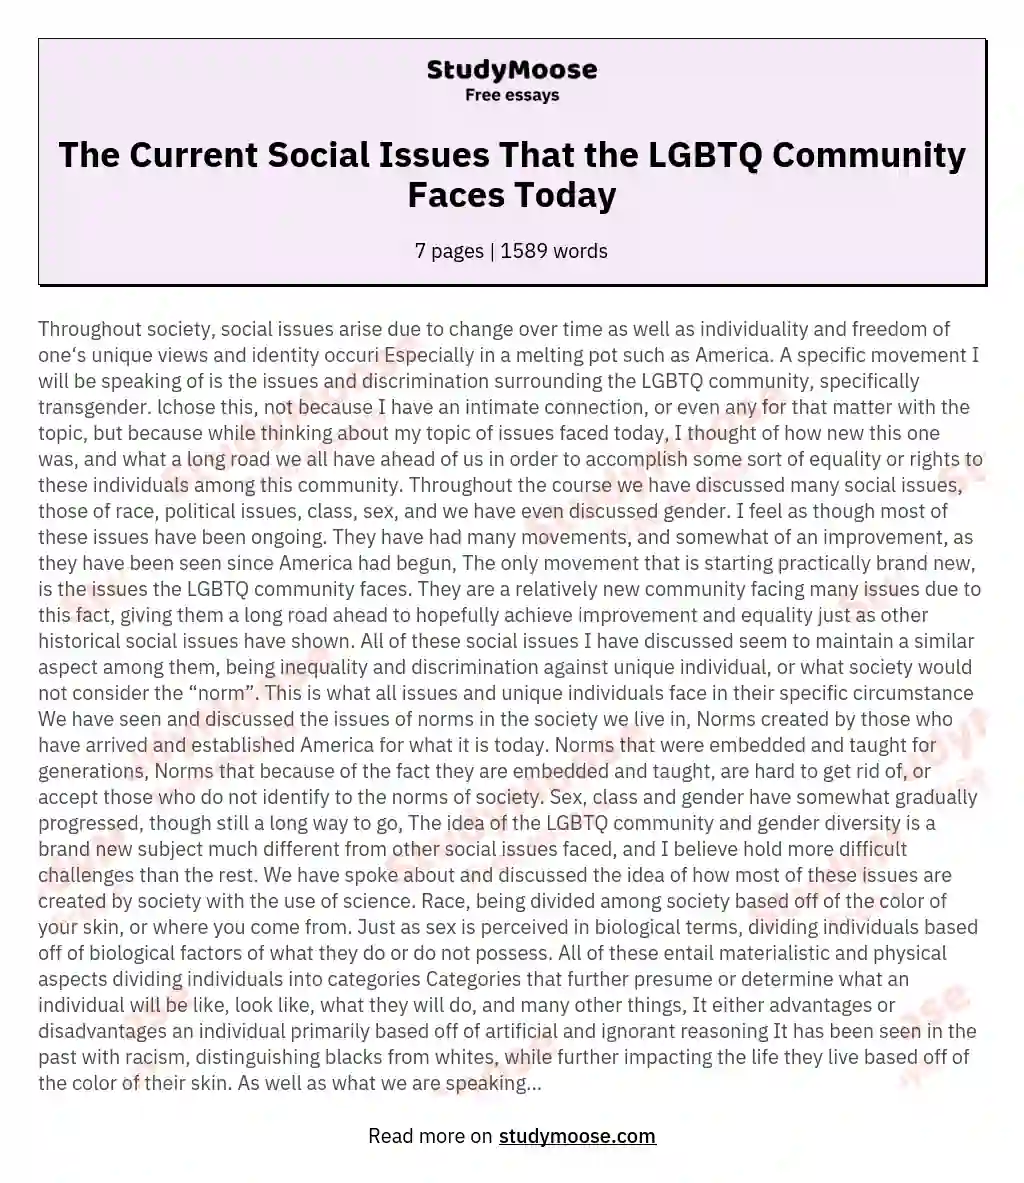 The Current Social Issues That the LGBTQ Community Faces Today essay